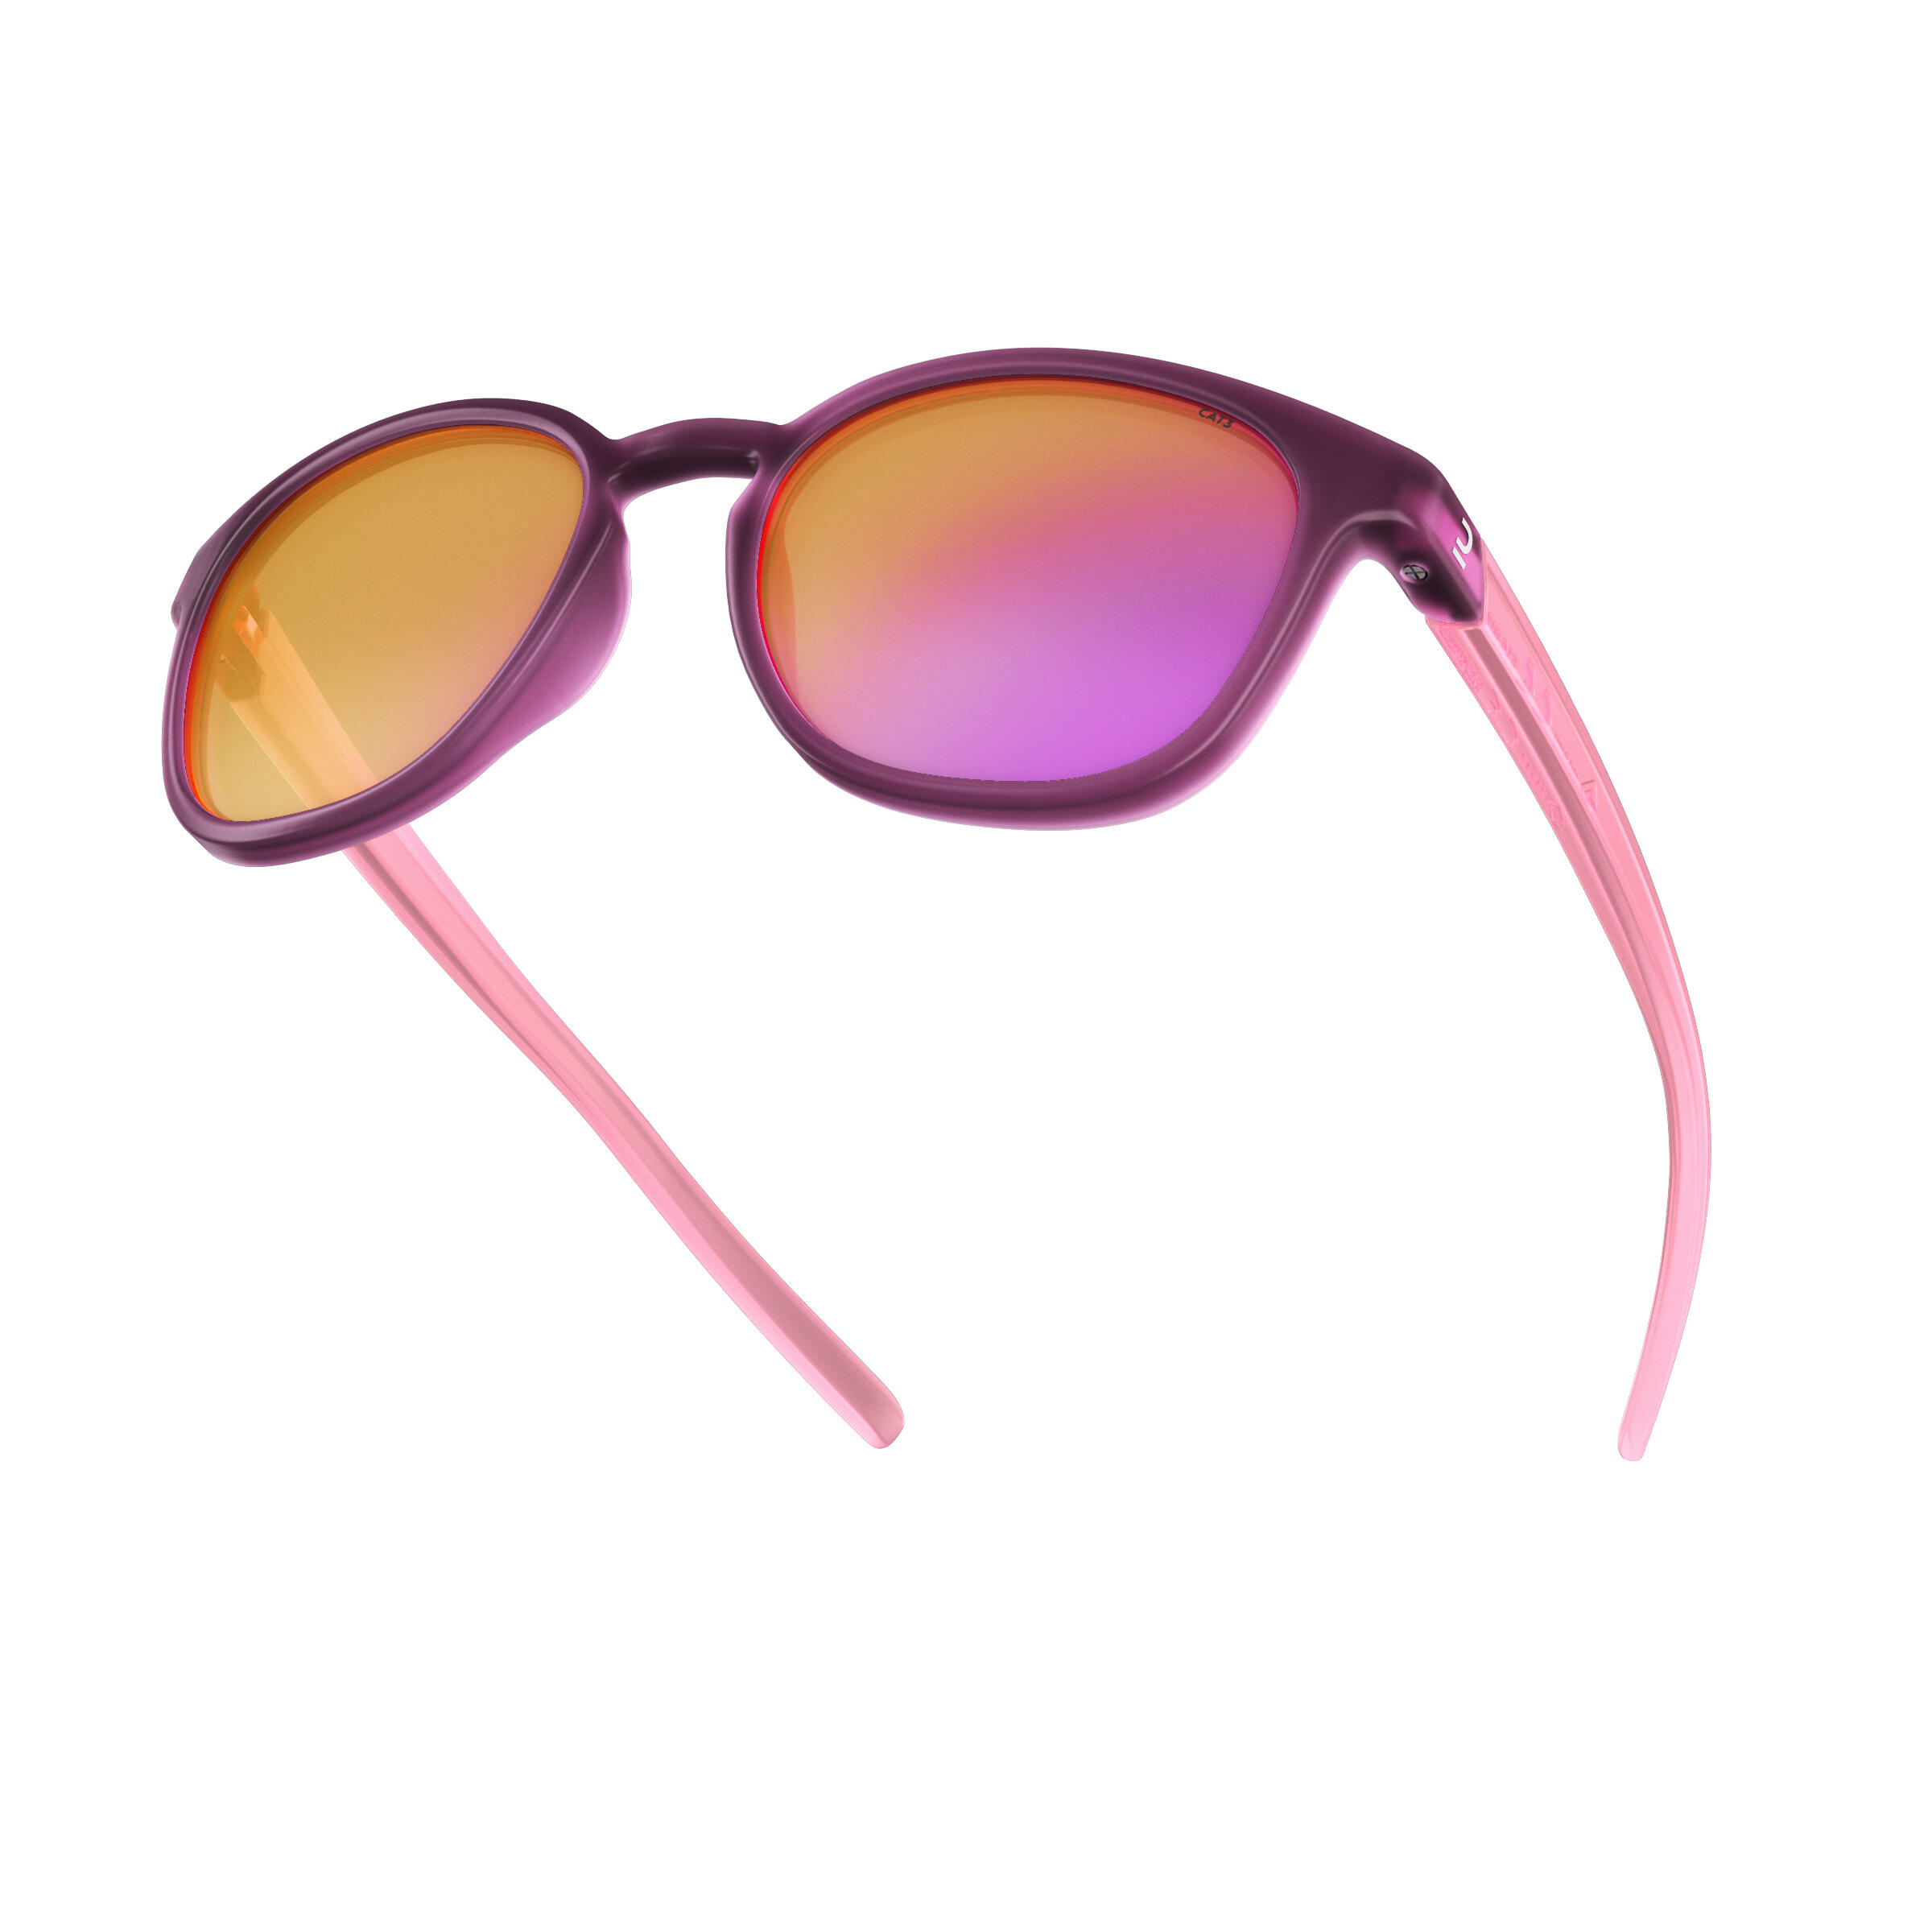 Adult - Hiking Sunglasses - MH160 - Category 3 6/11